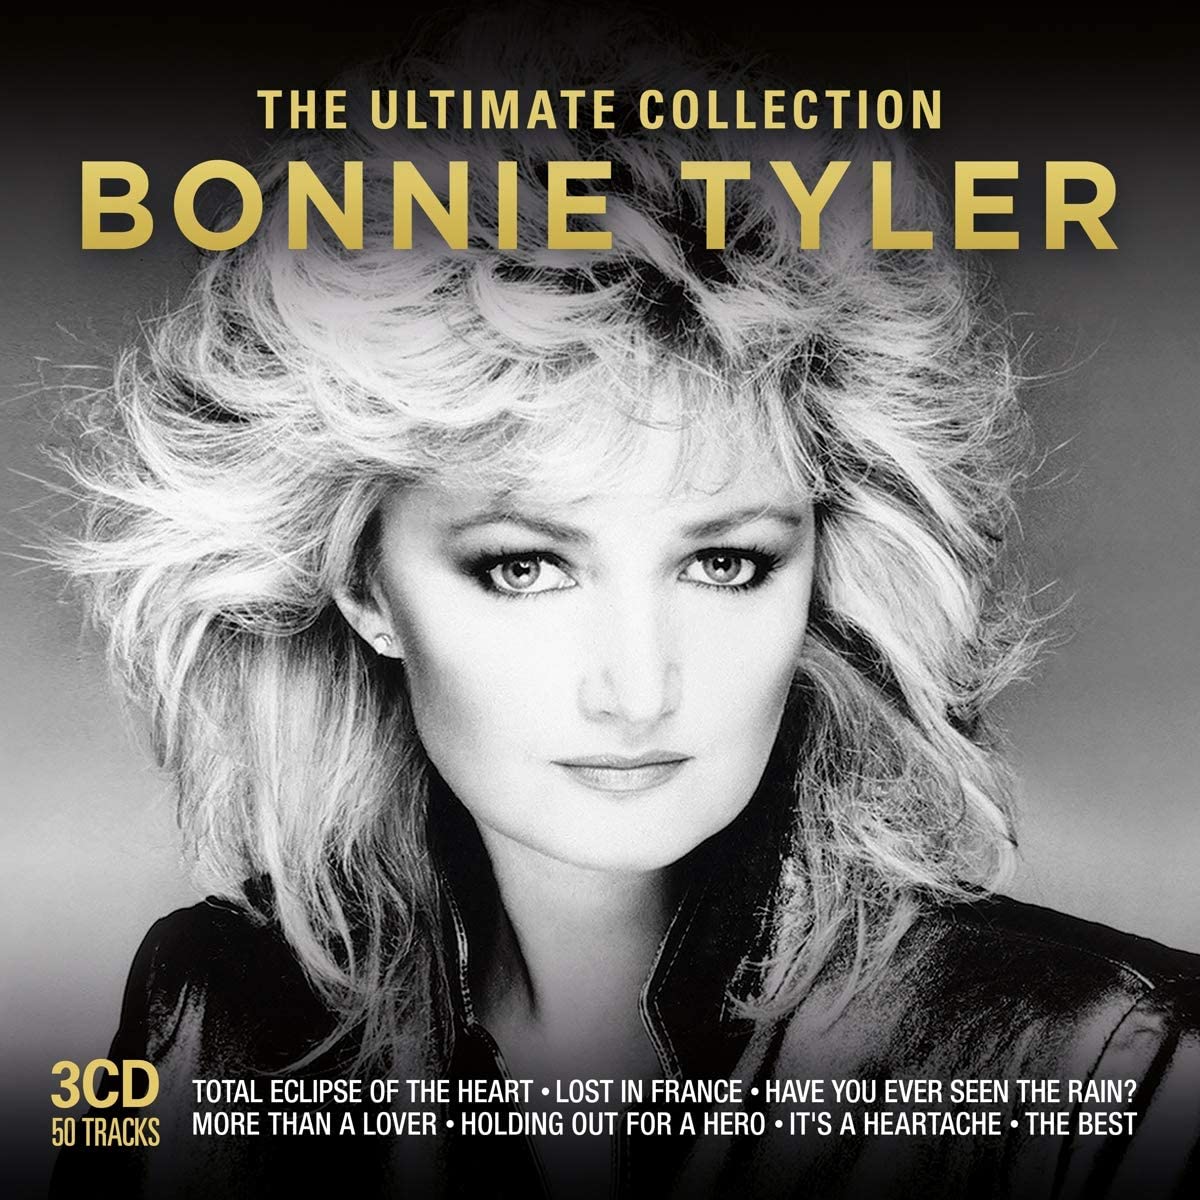 THE ULTIMATE COLLECTION - 3CD BOXSET